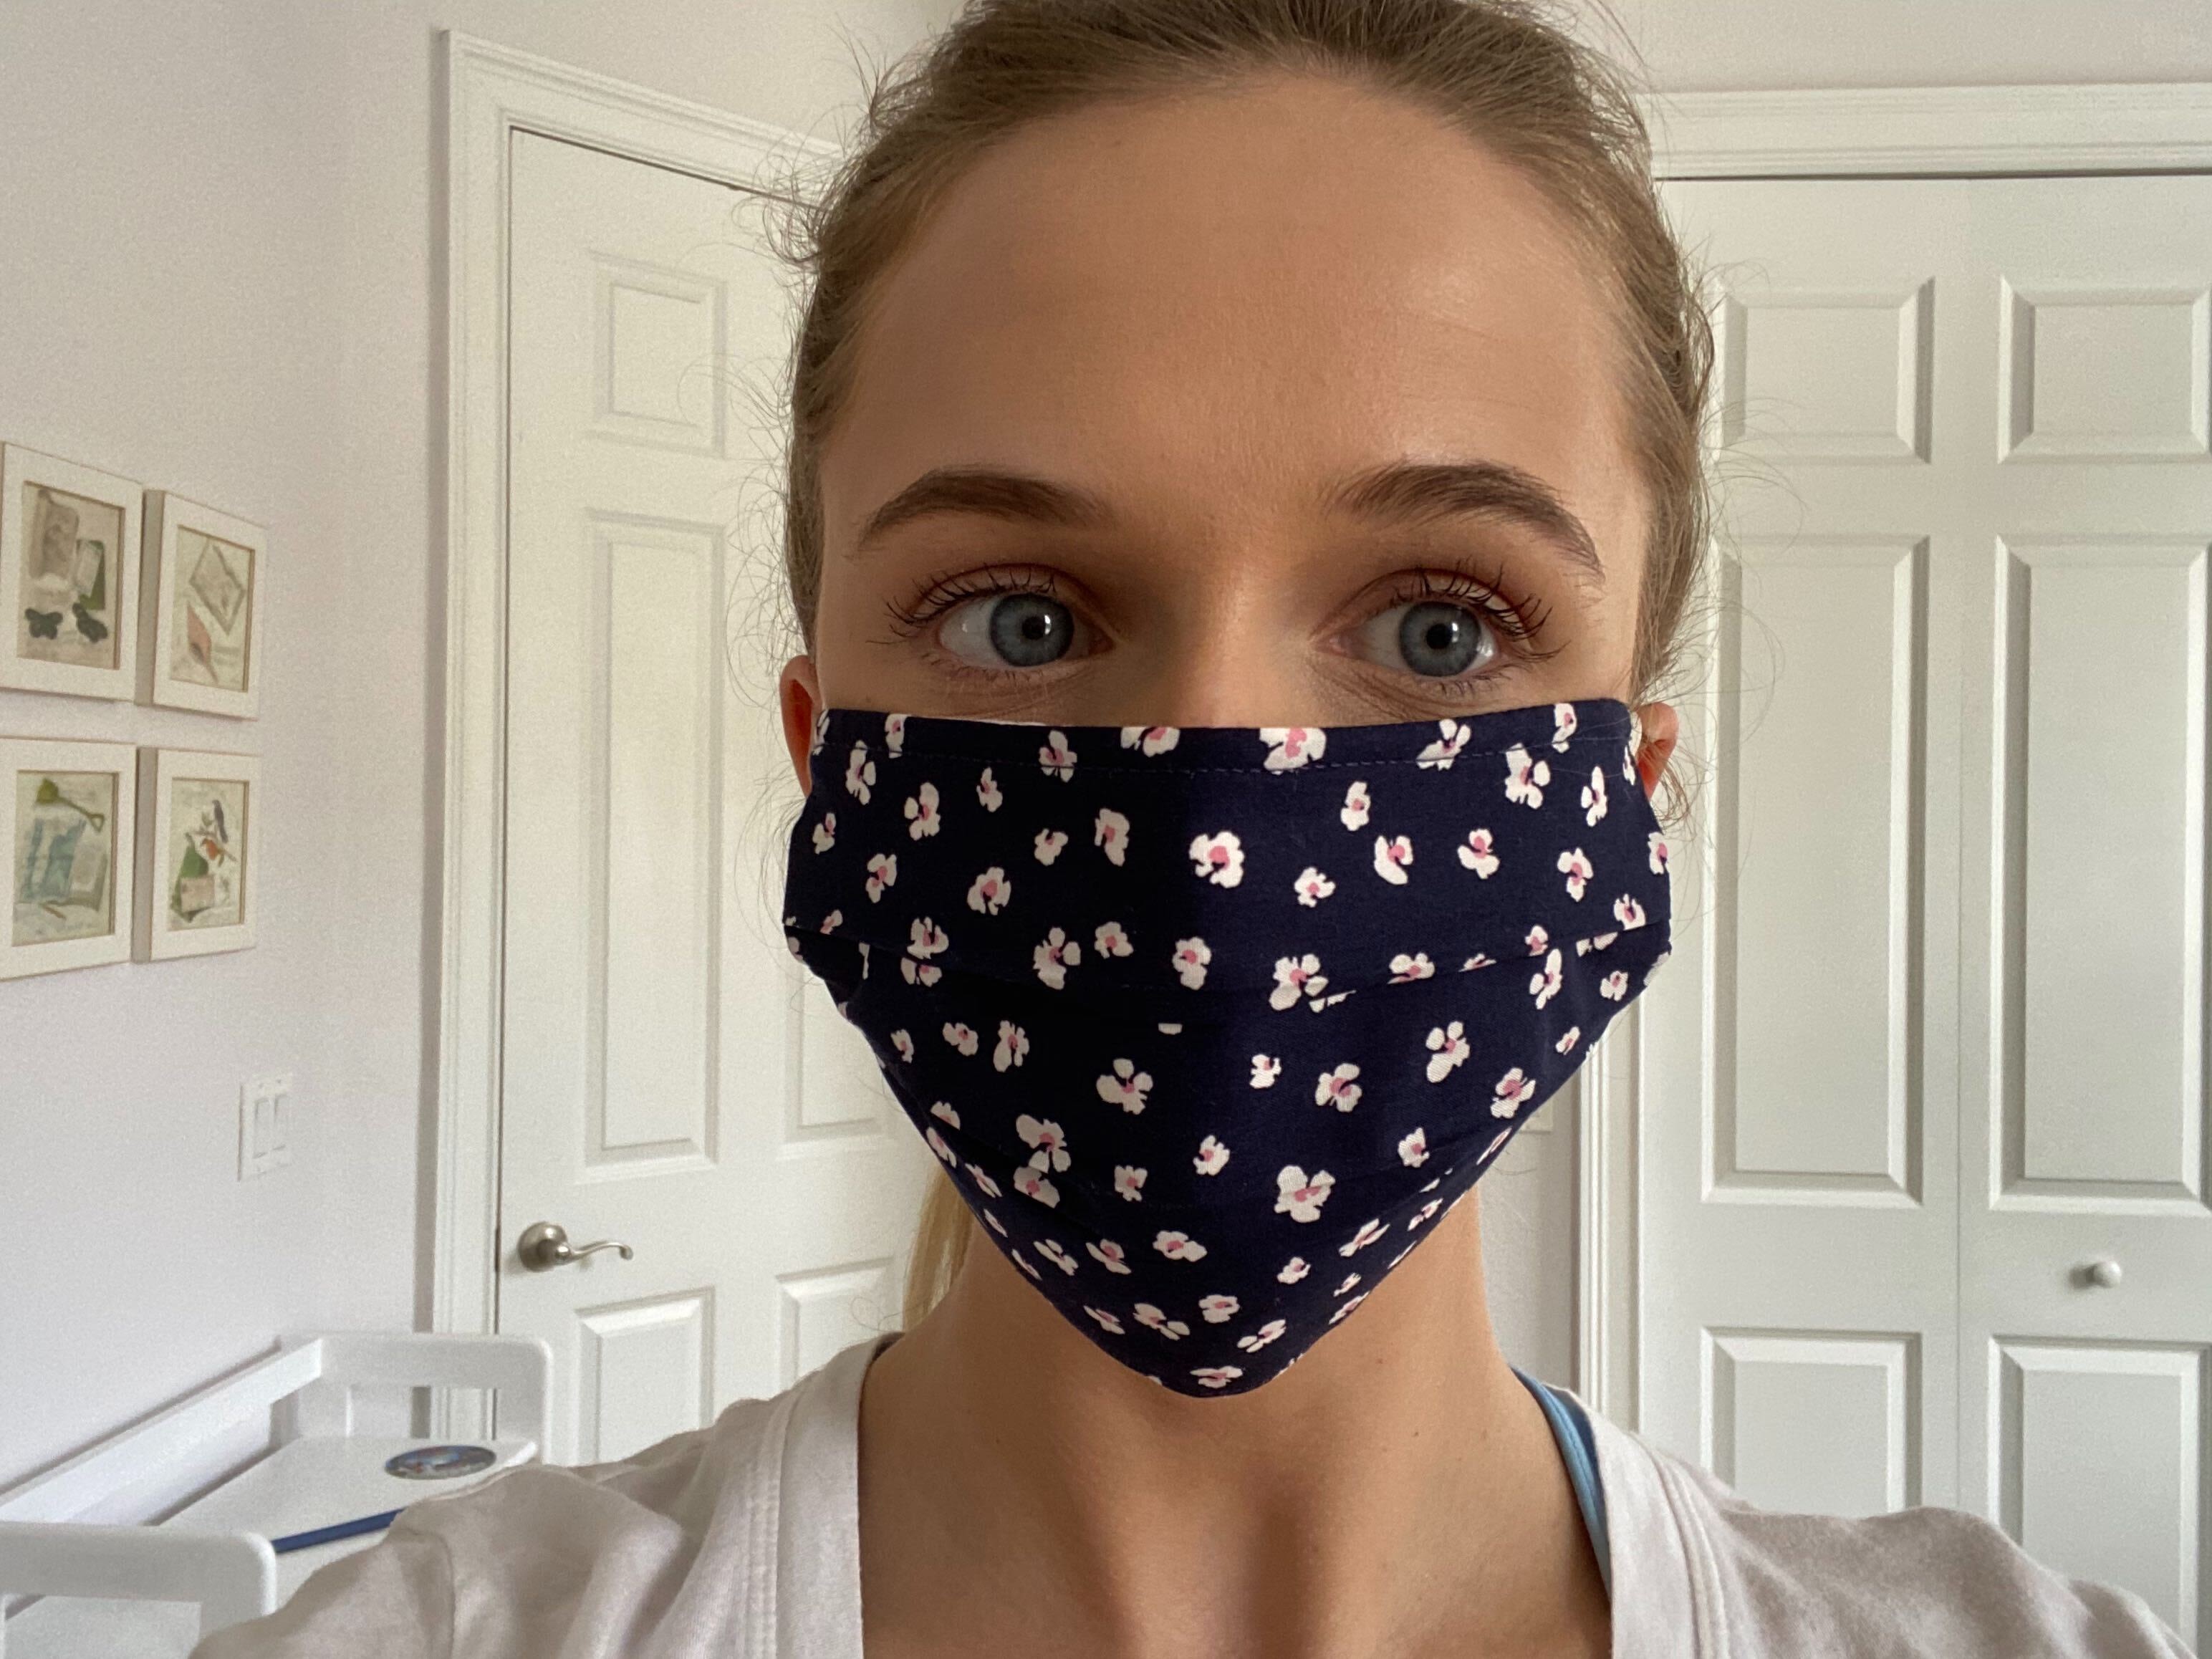 How to Make a Mask Out of Fabric: DIY Face Mask Instructions